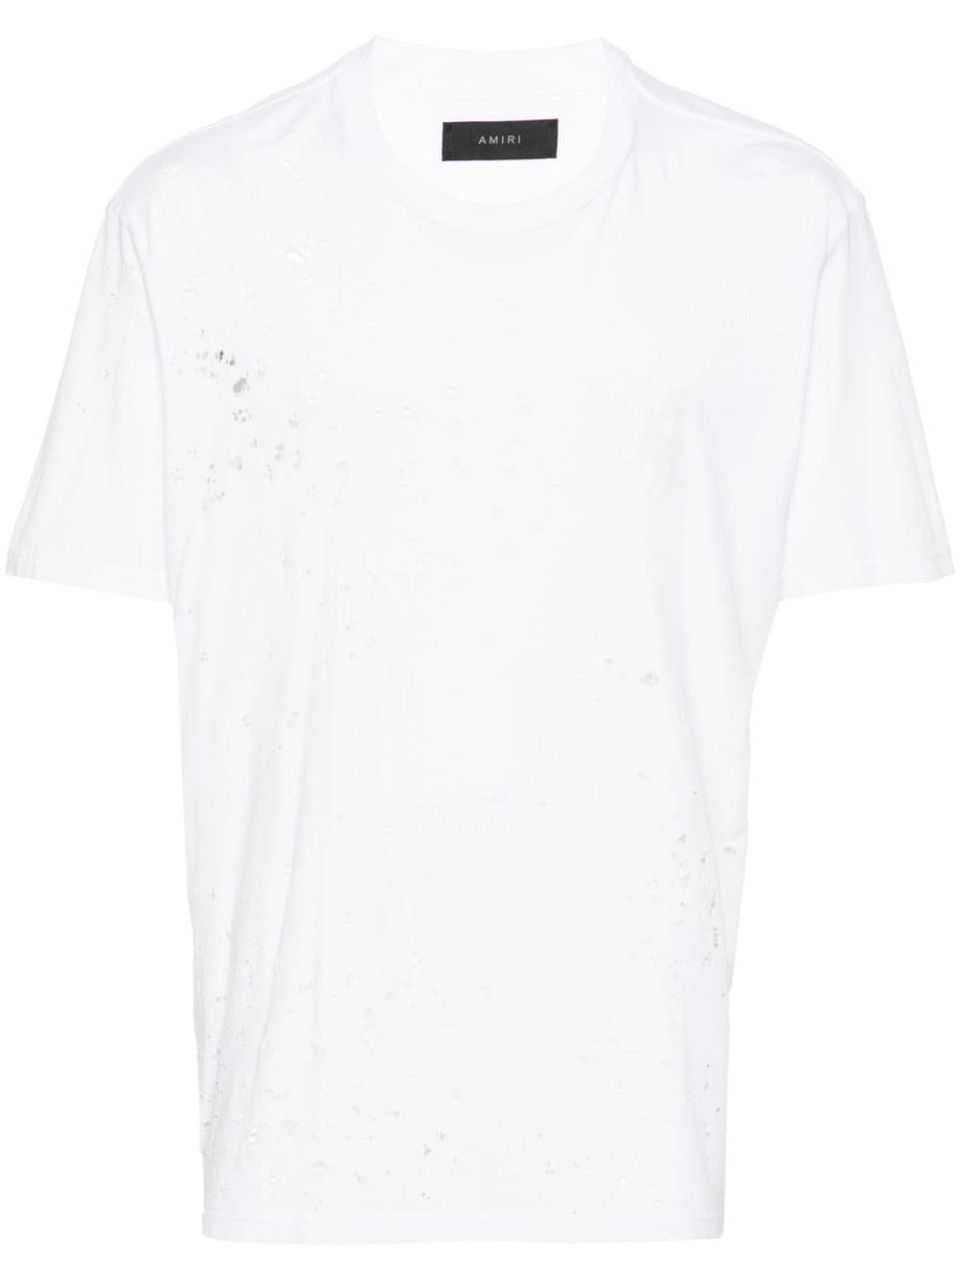 Distressed effect t-shirt